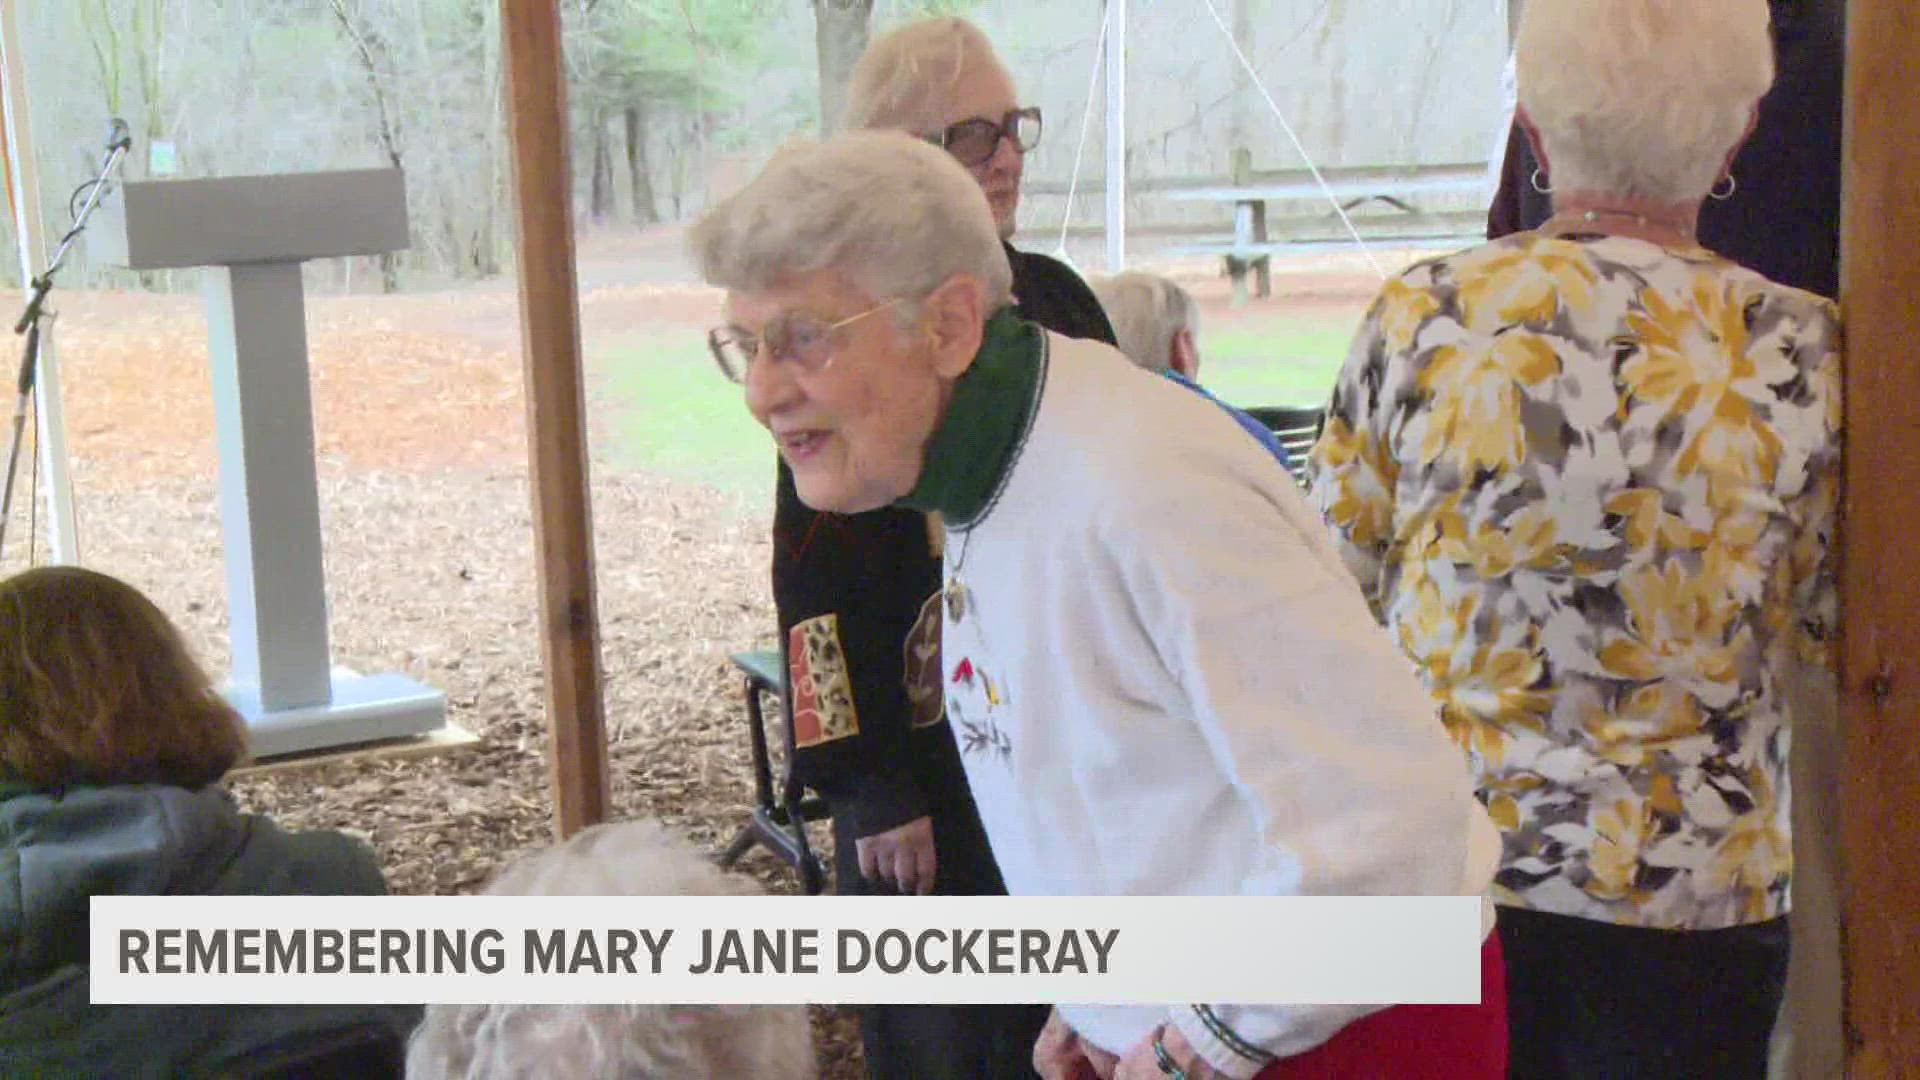 Mary Jane Dockeray founded Blandford Nature Center in Grand Rapids in 1968. For Women's History Month, we're taking a closer look at the legacy she left behind.